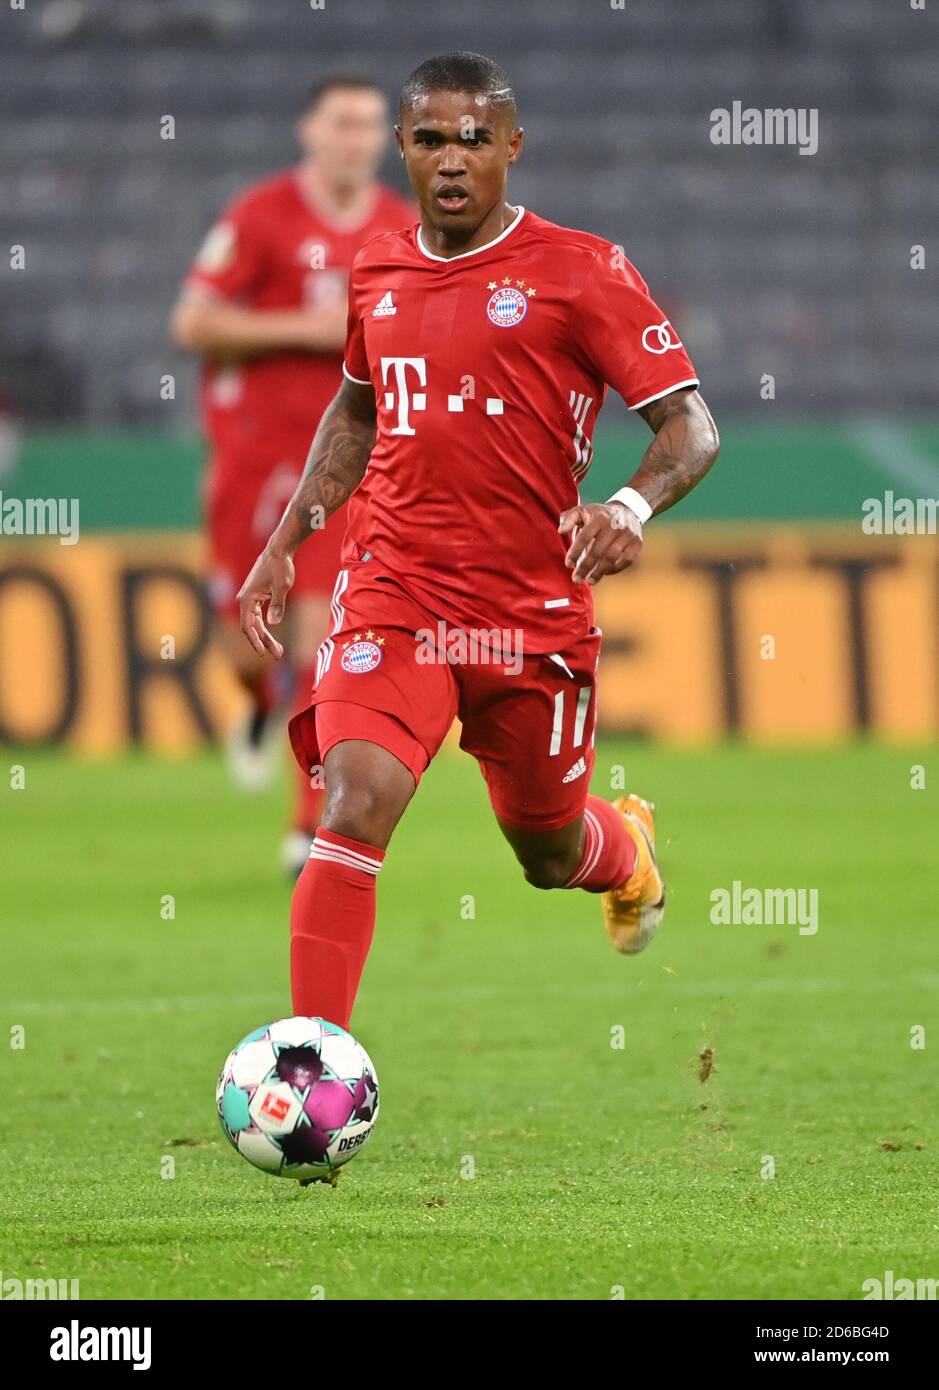 Munich, Germany. 15th Oct, 2020. Douglas Costa de Souza from FC Bayern  Munich. Credit: Peter Kneffel/dpa - IMPORTANT NOTE: In accordance with the  regulations of the DFL Deutsche Fußball Liga and the